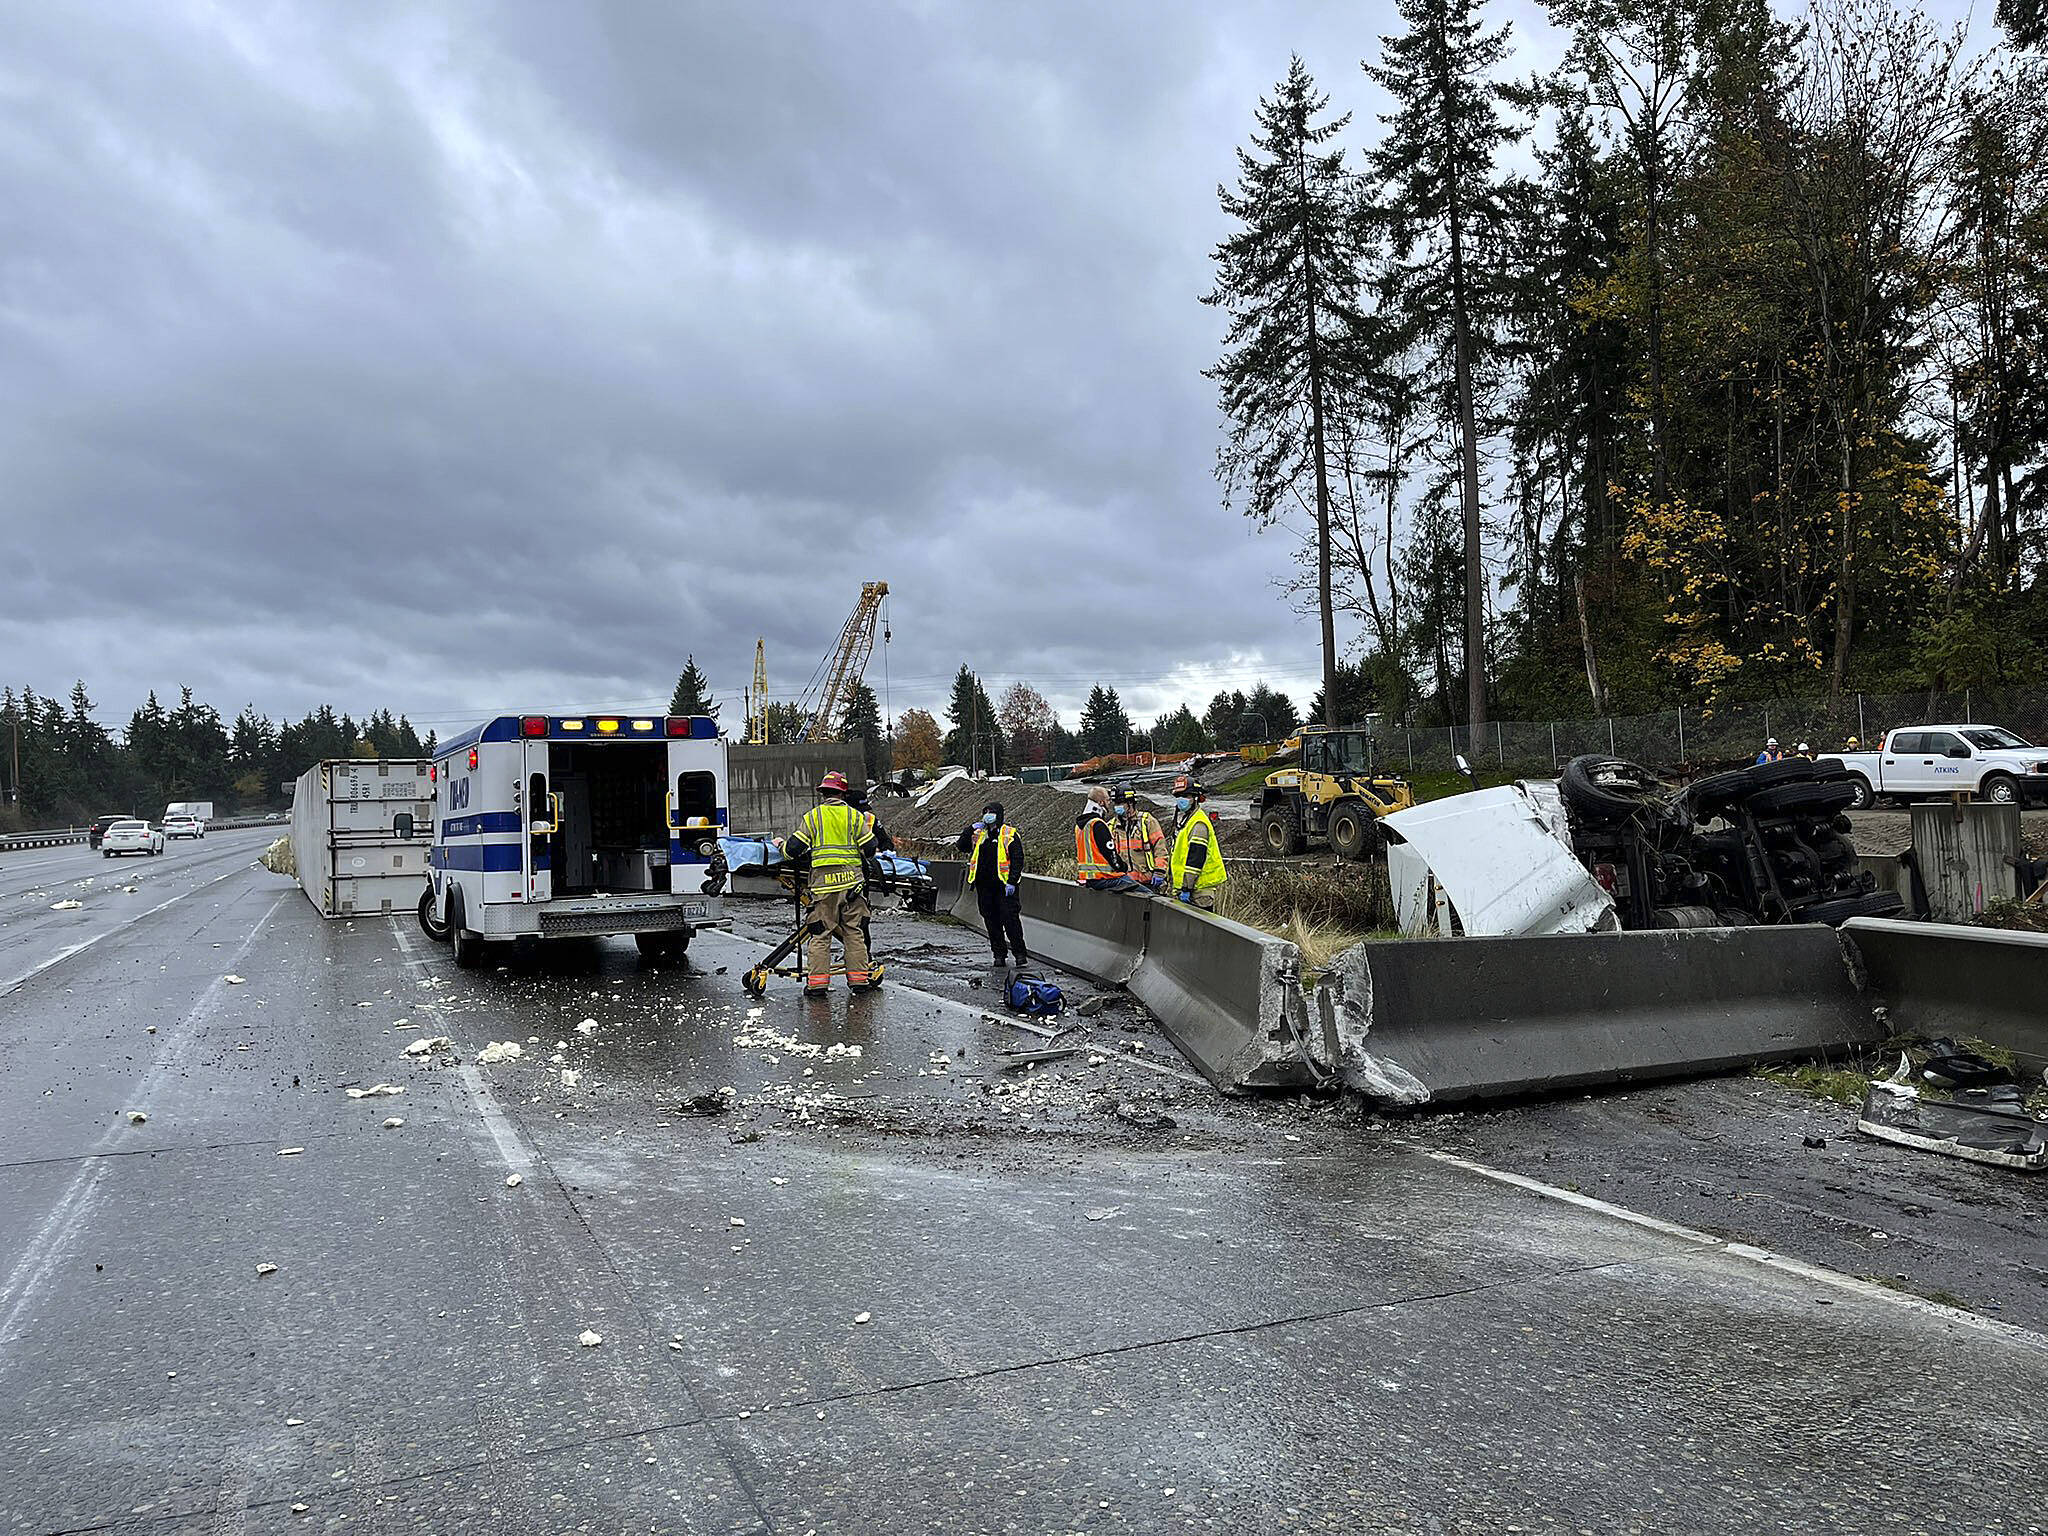 A crash injured four people on Thursday, Oct. 28 in the Interstate 5 southbound lanes near South 272nd Street. COURTESY PHOTO, South King Fire and Rescue